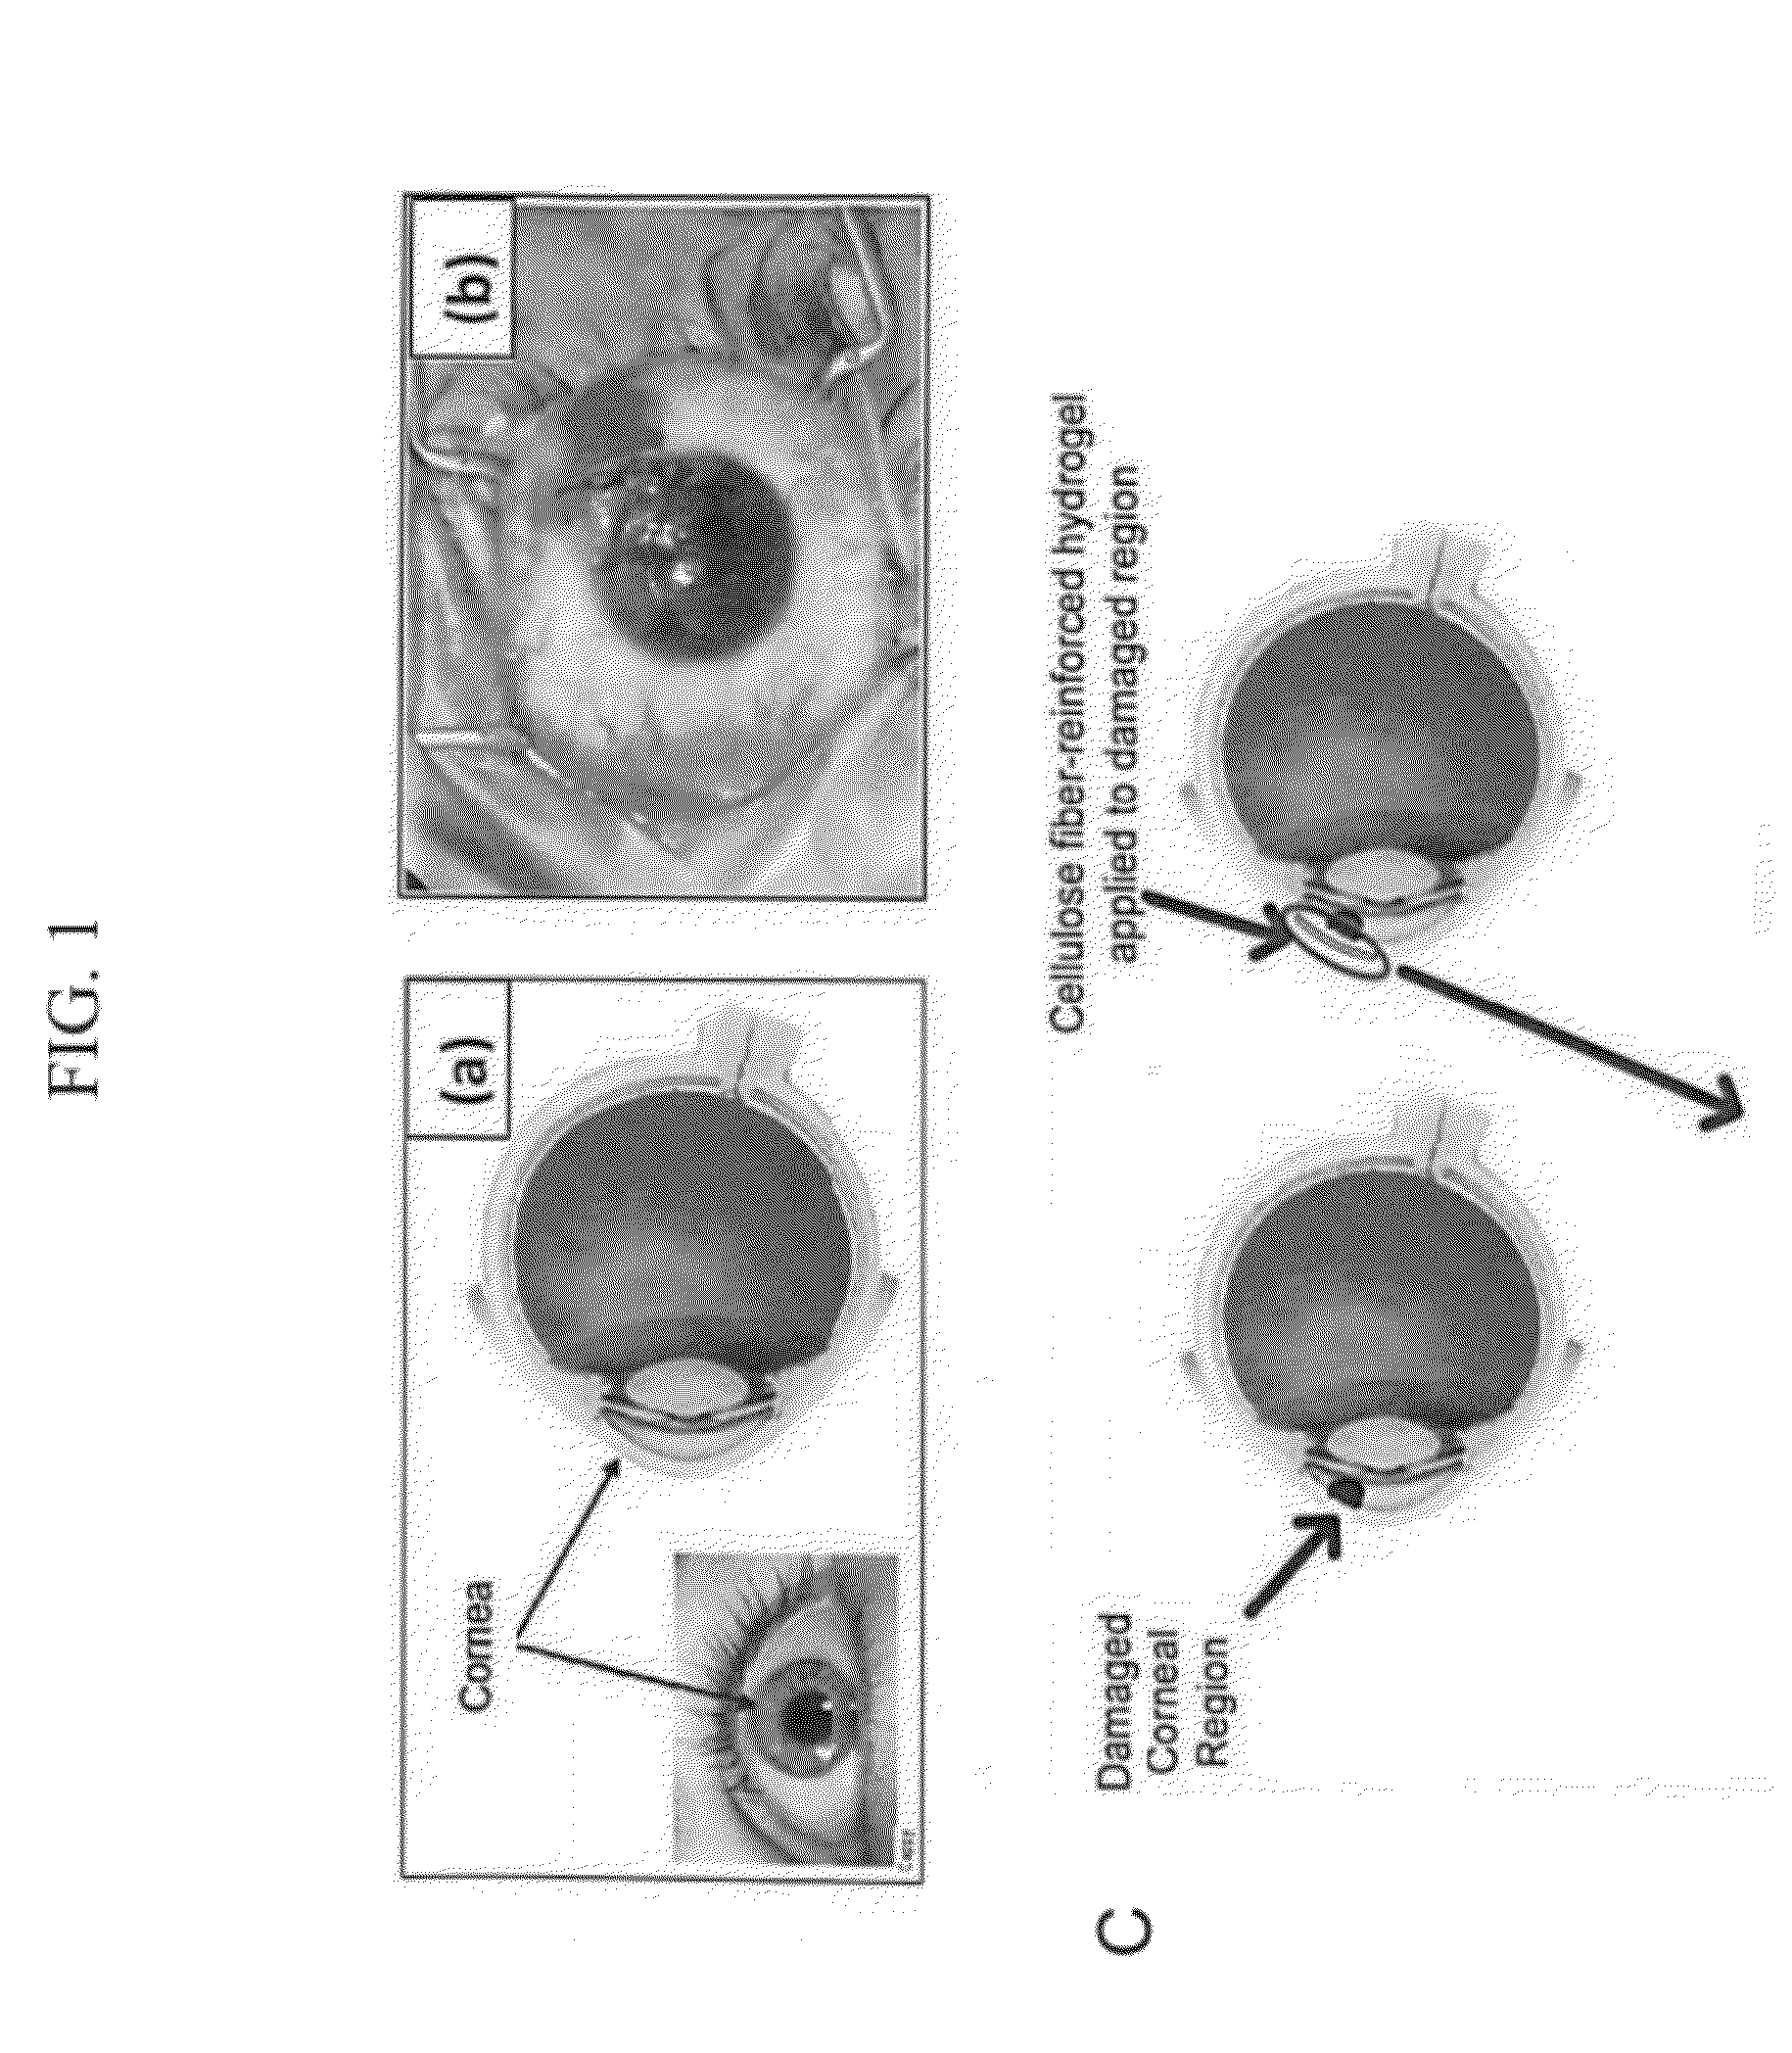 Wound Healing Compositions Comprising Biocompatible Cellulose Hydrogel Membranes and Methods of Use Thereof